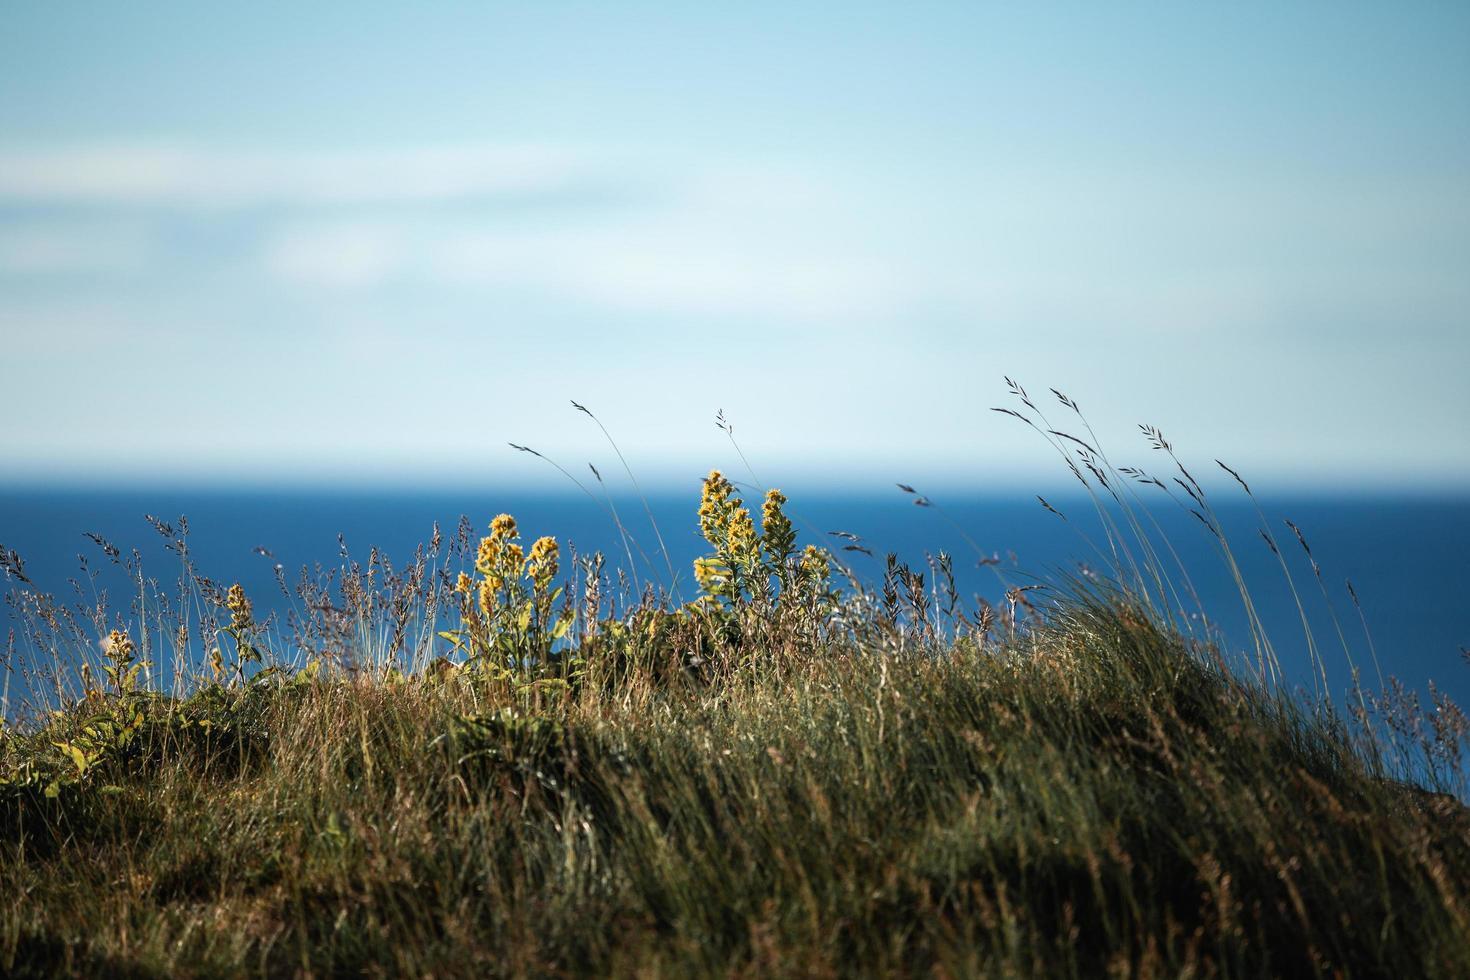 Grass and flowers against an ocean photo